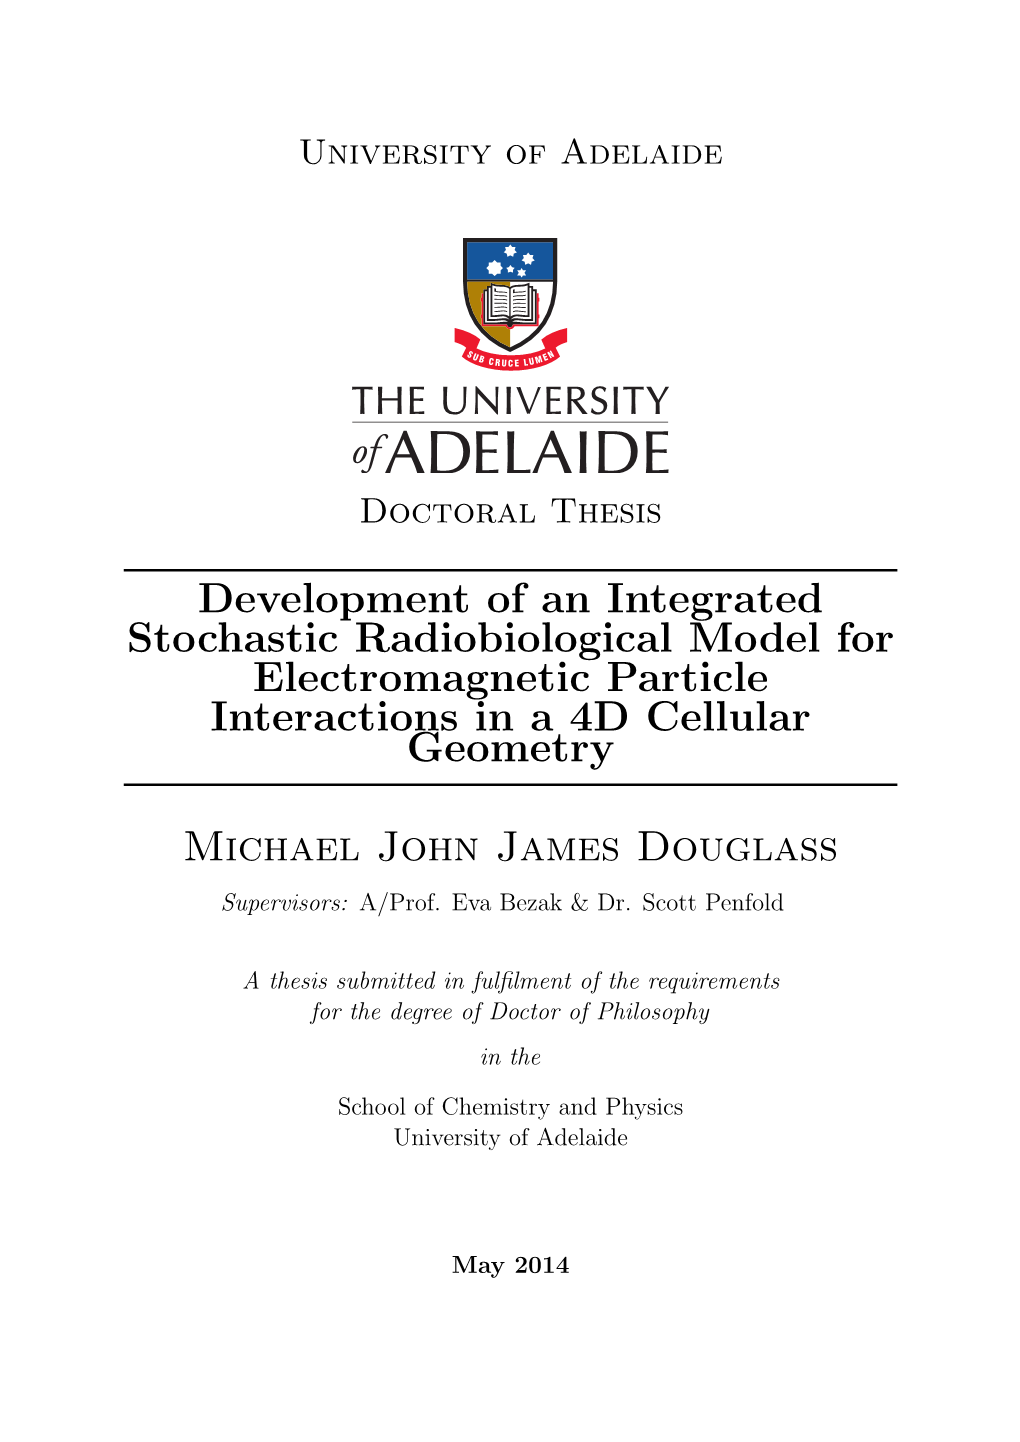 Development of an Integrated Stochastic Radiobiological Model for Electromagnetic Particle Interactions in a 4D Cellular Geometry